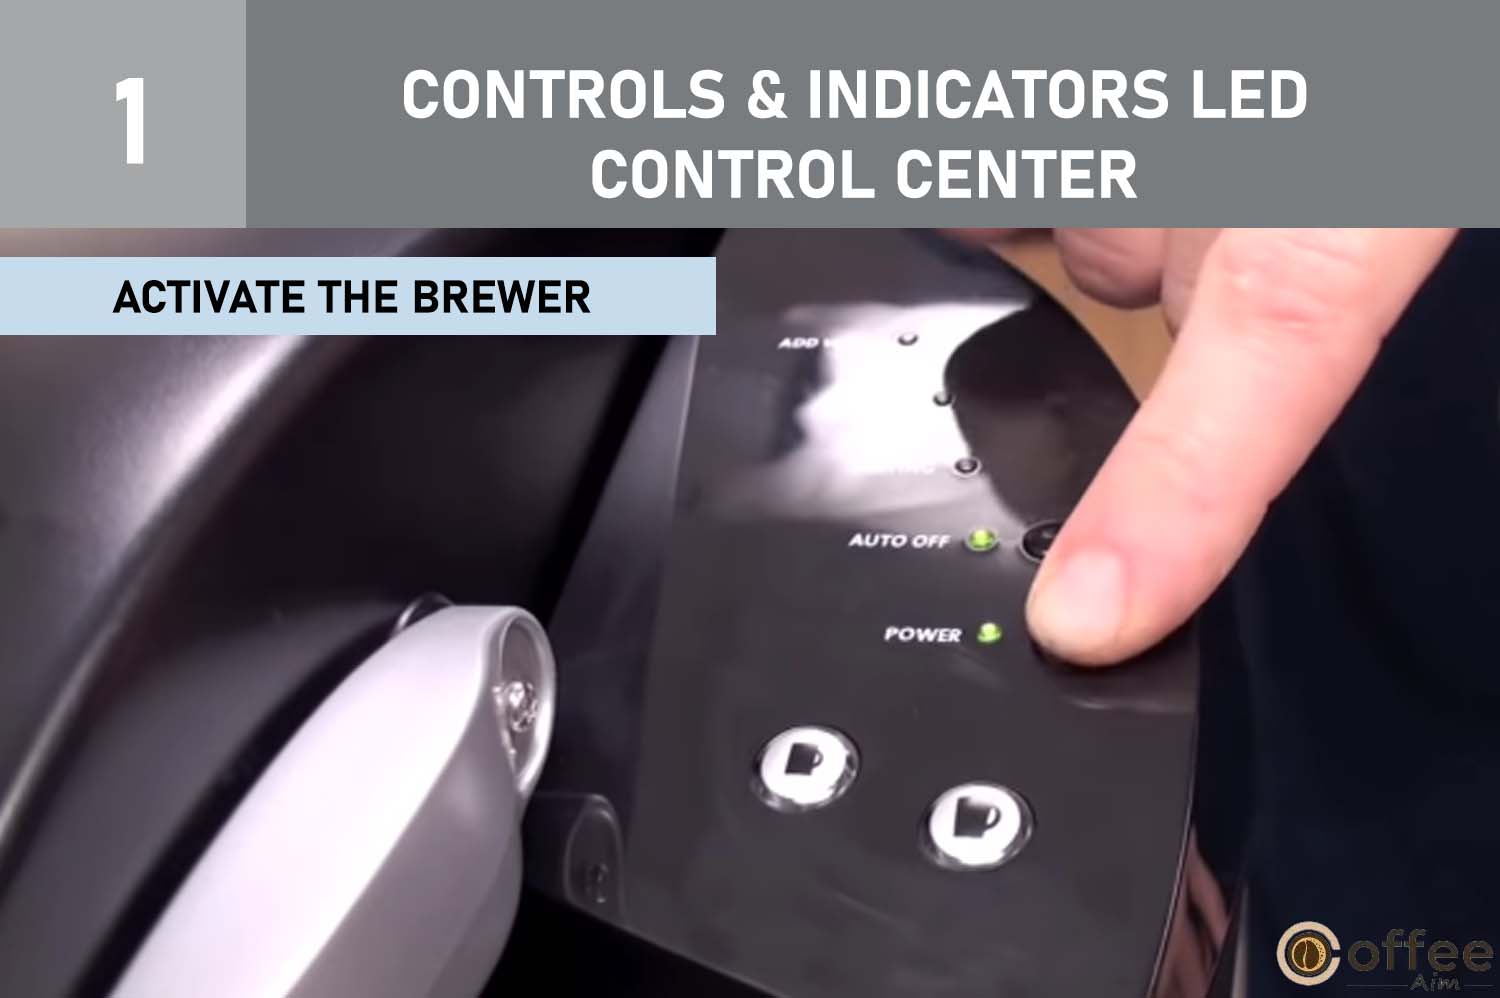 This illustration elucidates the process of "Activating the Brewer" under the heading "CONTROLS & INDICATORS LED Control Center" in the comprehensive guide titled "How to Use the Keurig B-40."